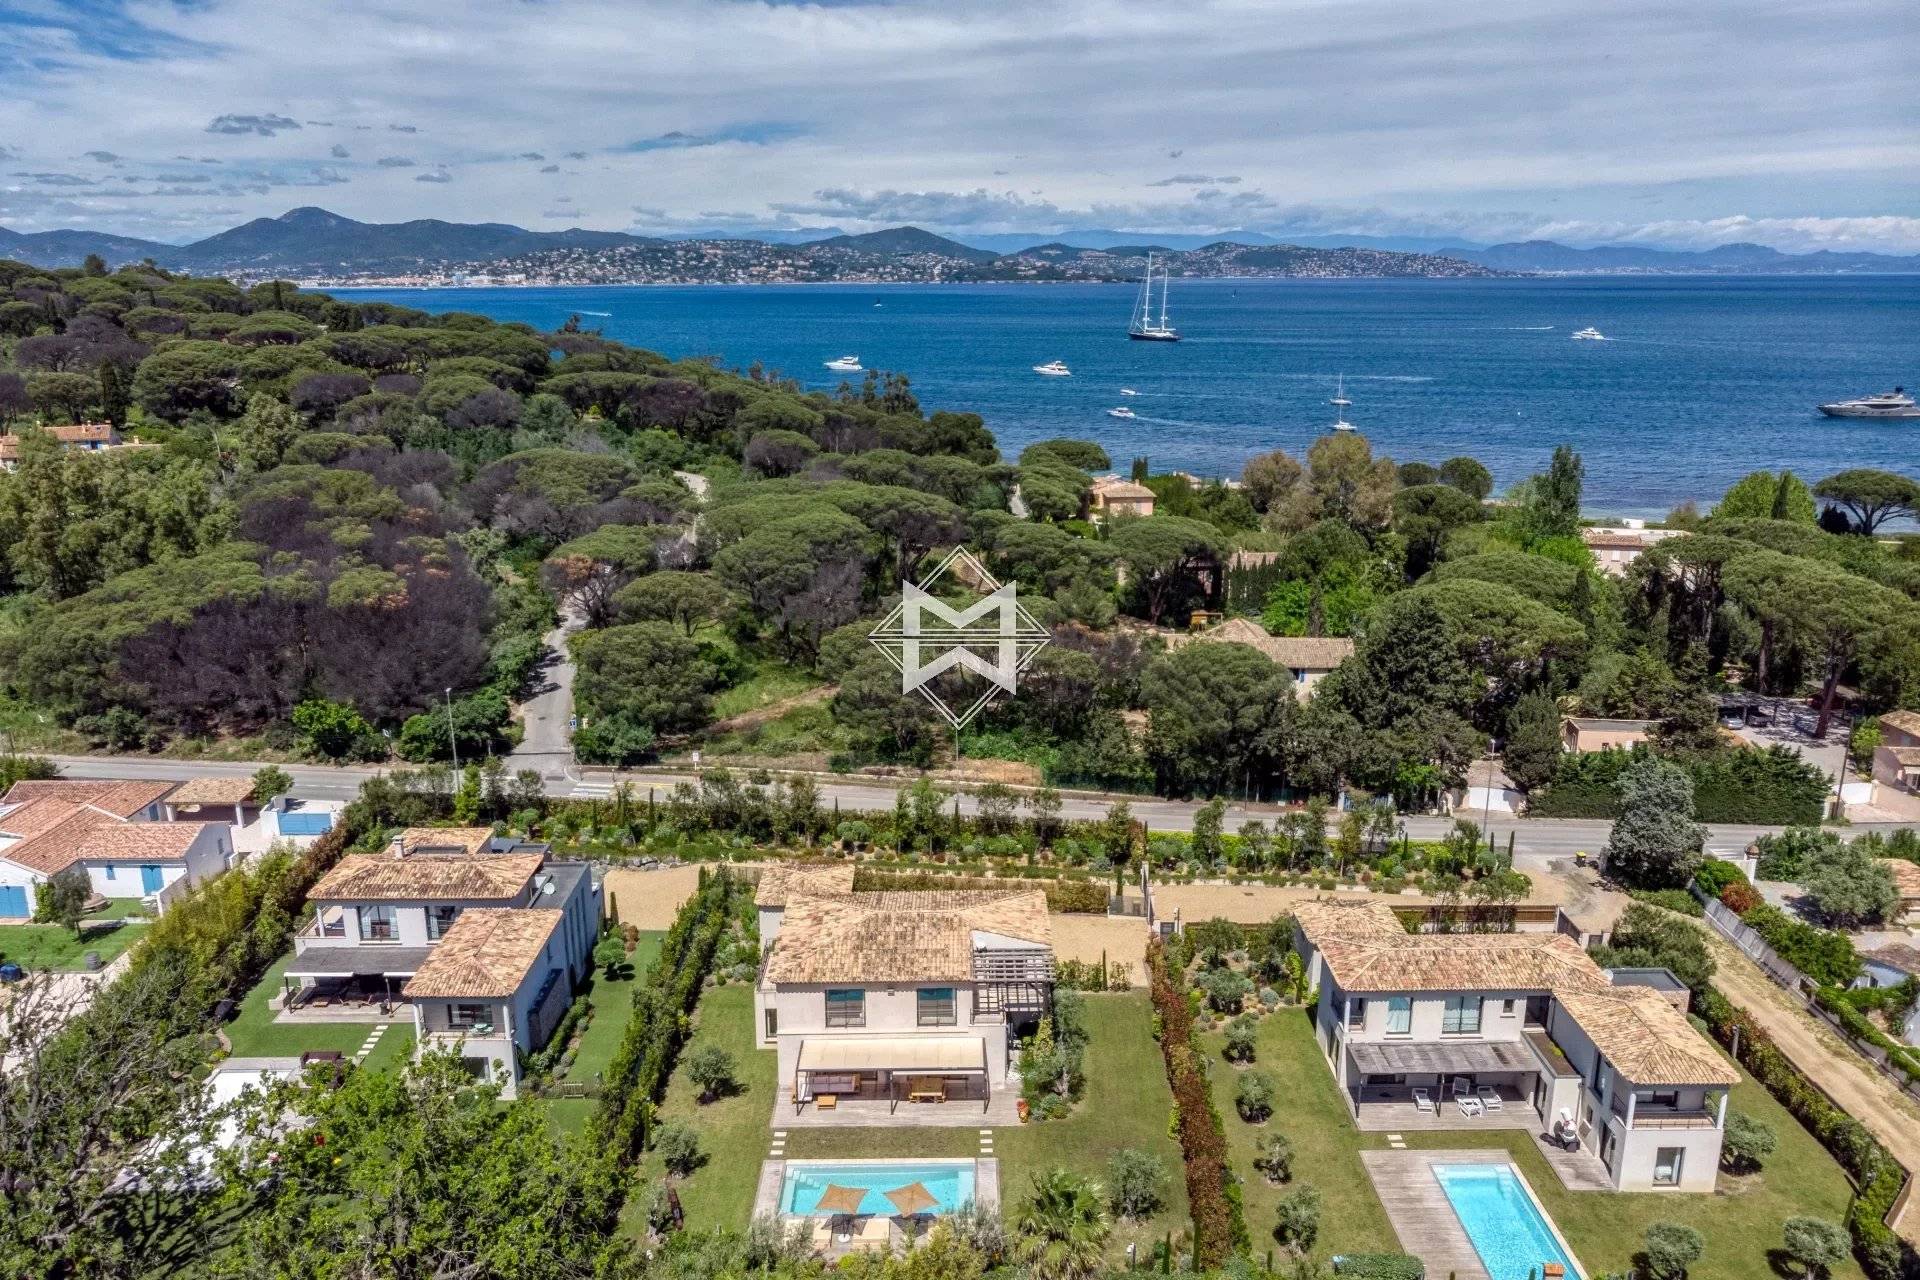 Between the beaches and the village of Saint Tropez